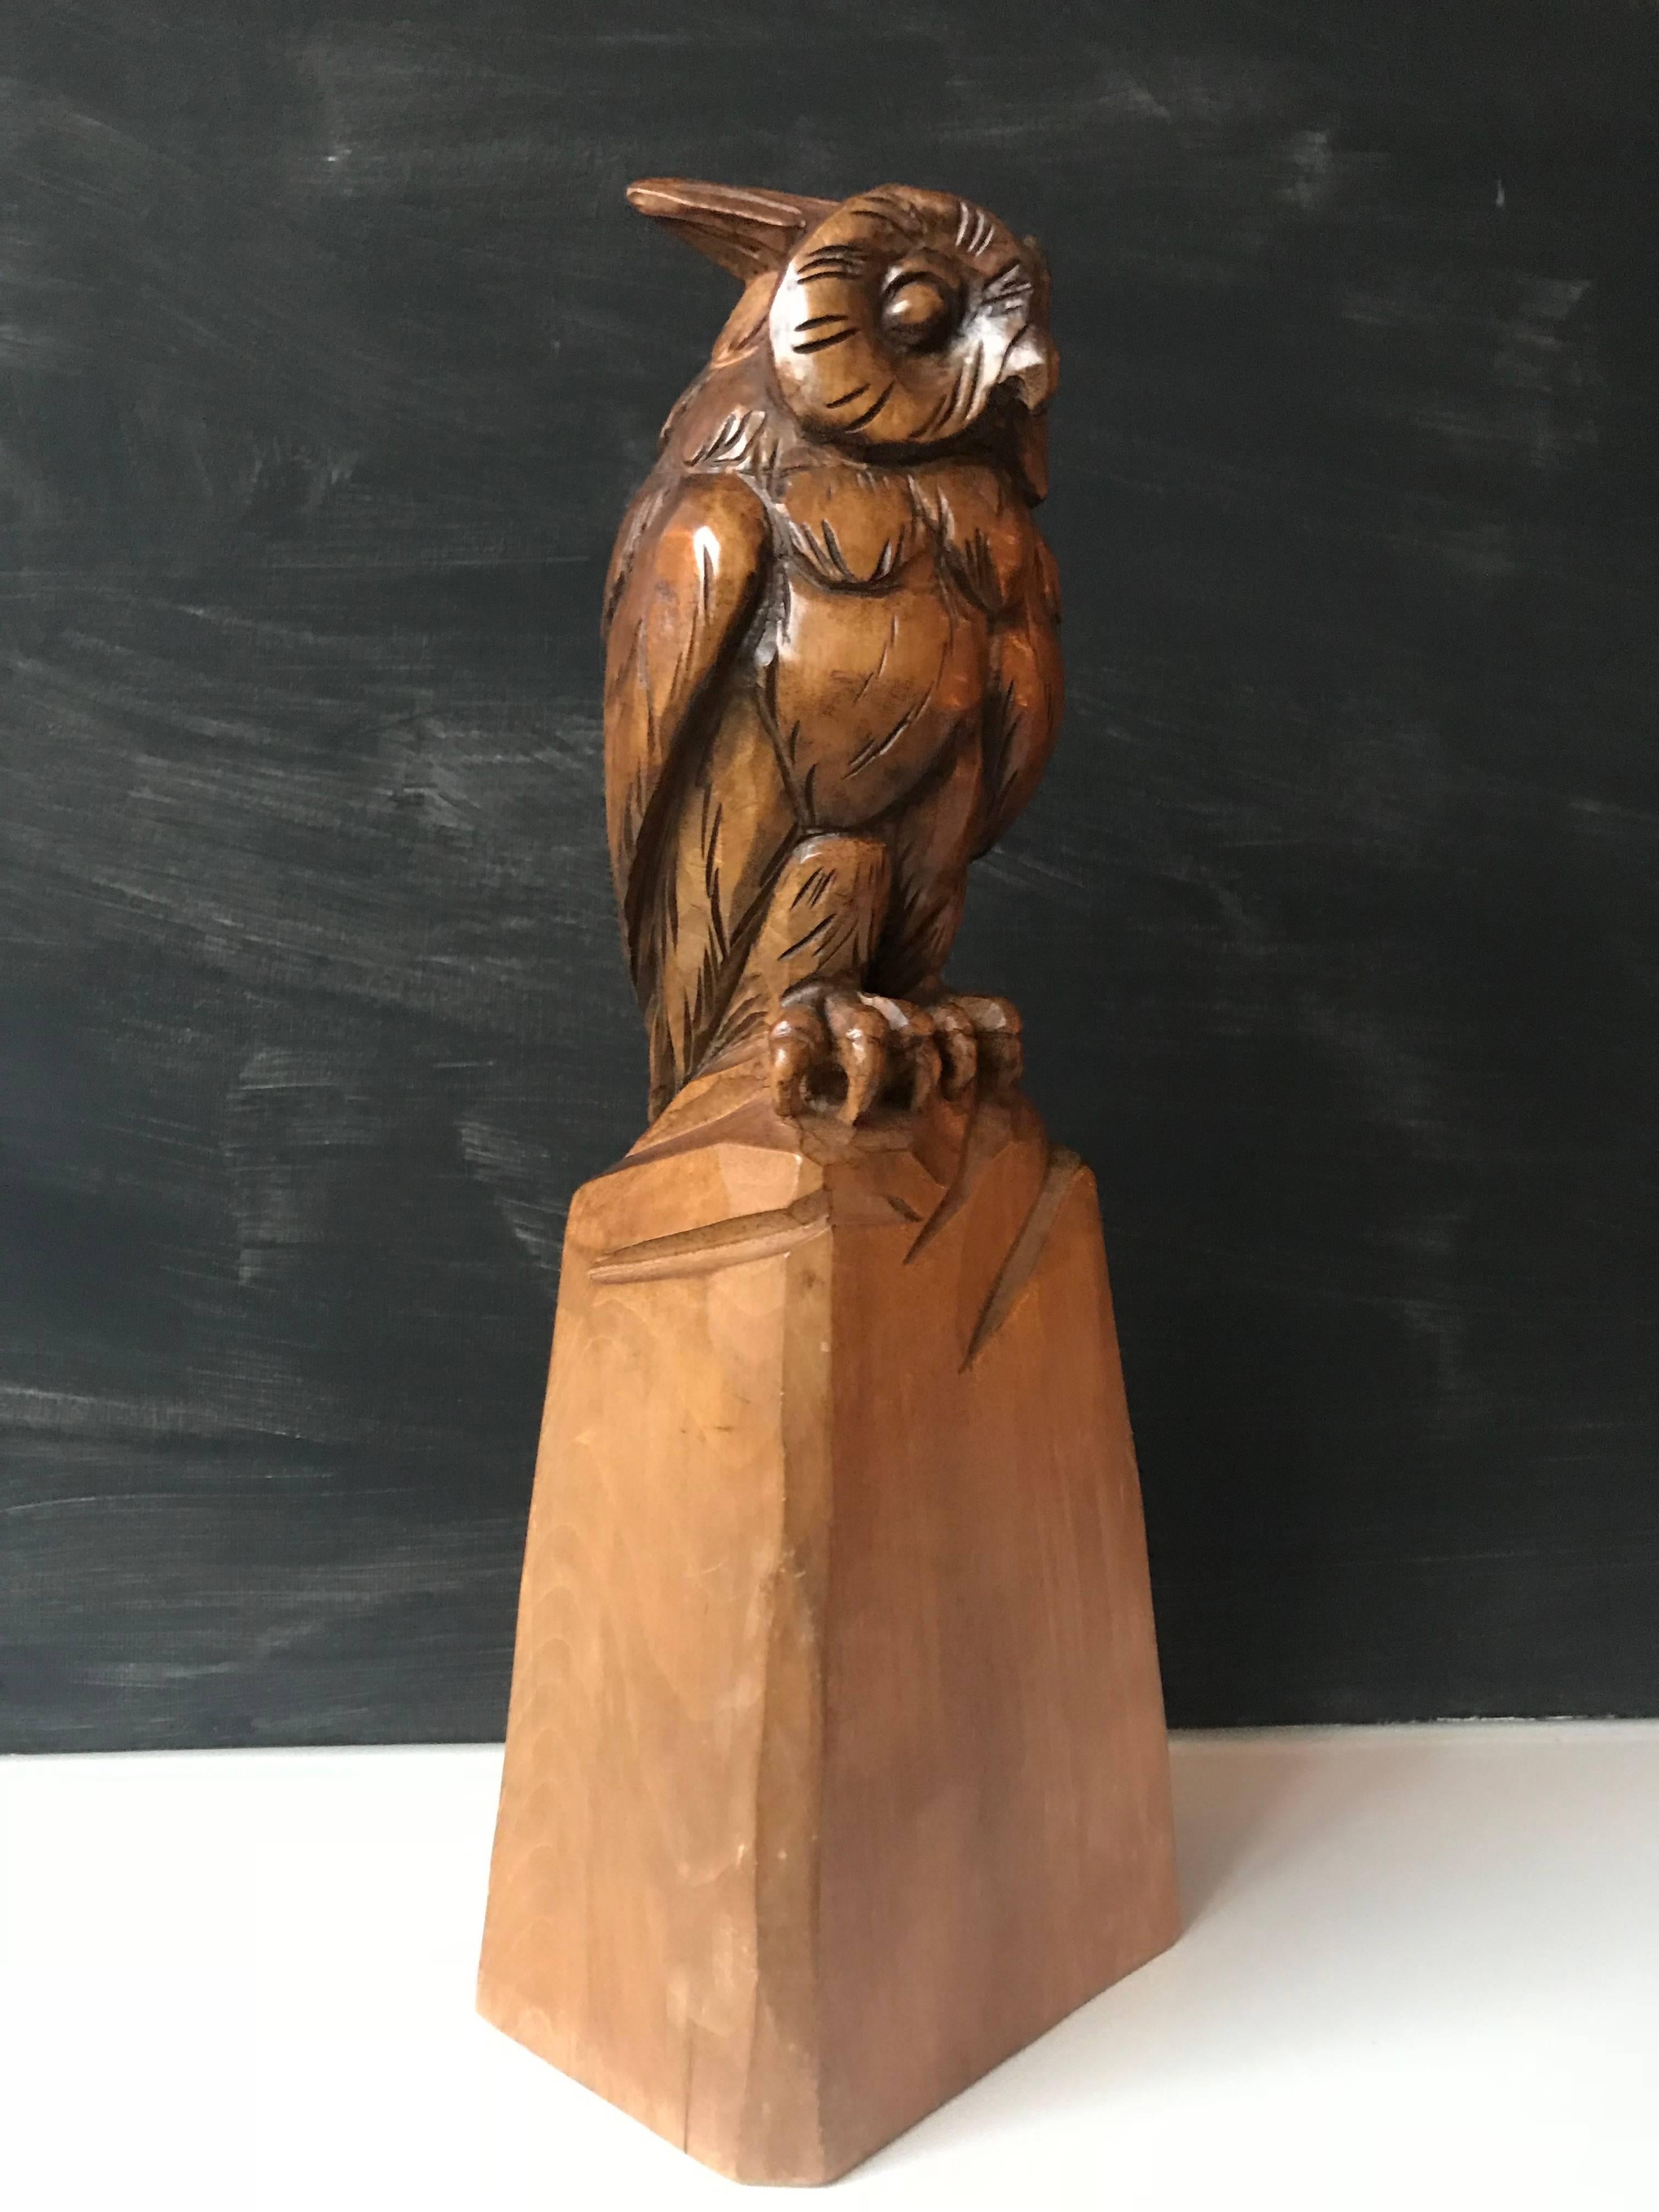 Art Deco era, hand-crafted owl sculpture. Early 1900s 

Through the ages, the owl as the international symbol of wisdom and learning has always had a great appeal to art collectors and scholars around the world. This fine example, sitting on a rock